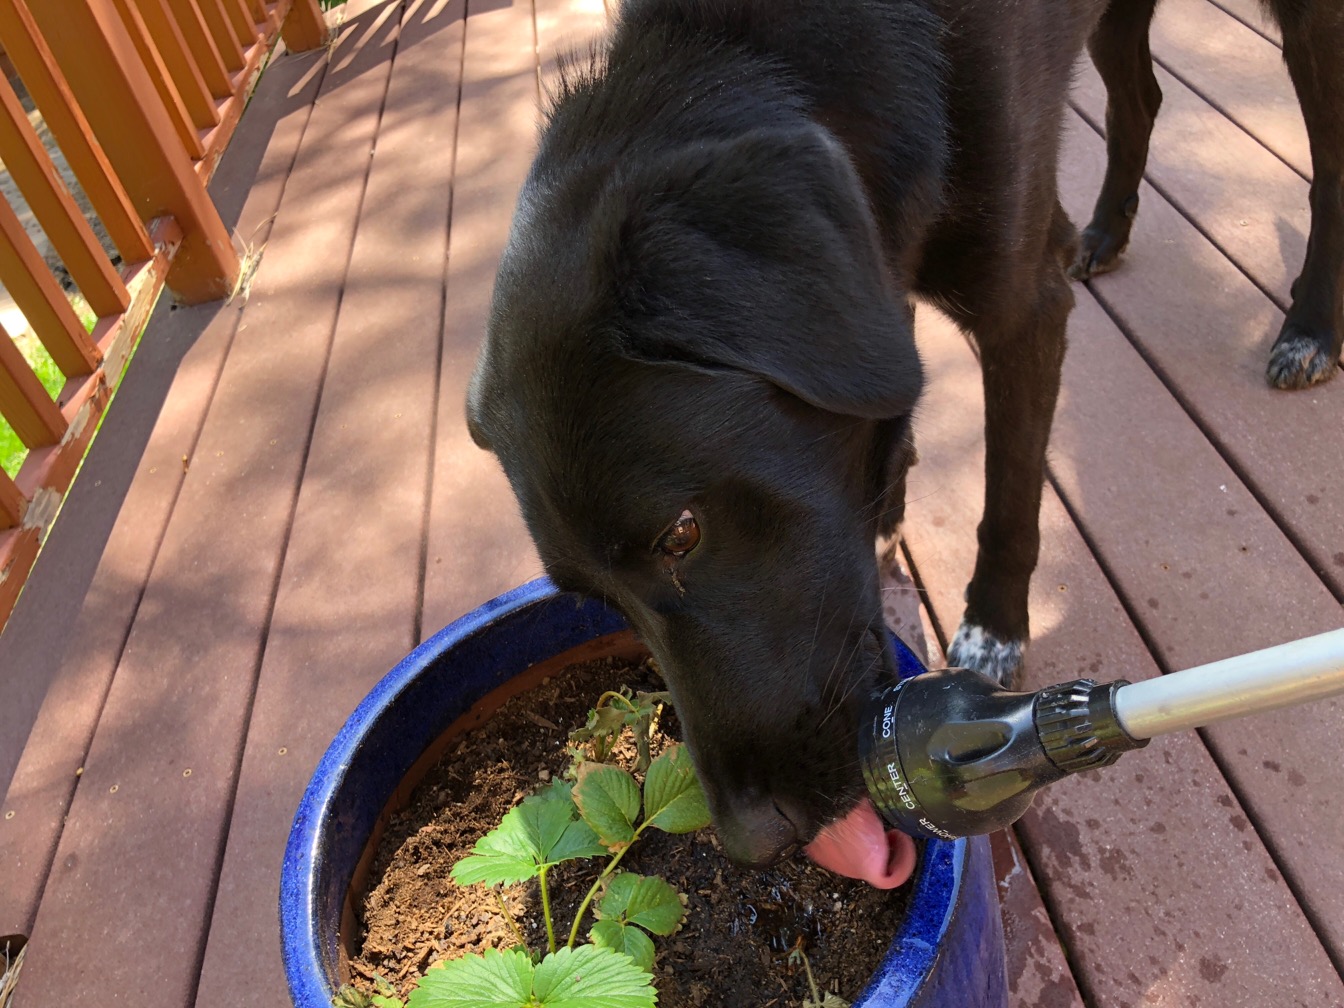 Black dog drinking from the hose nozzle over a planter.  